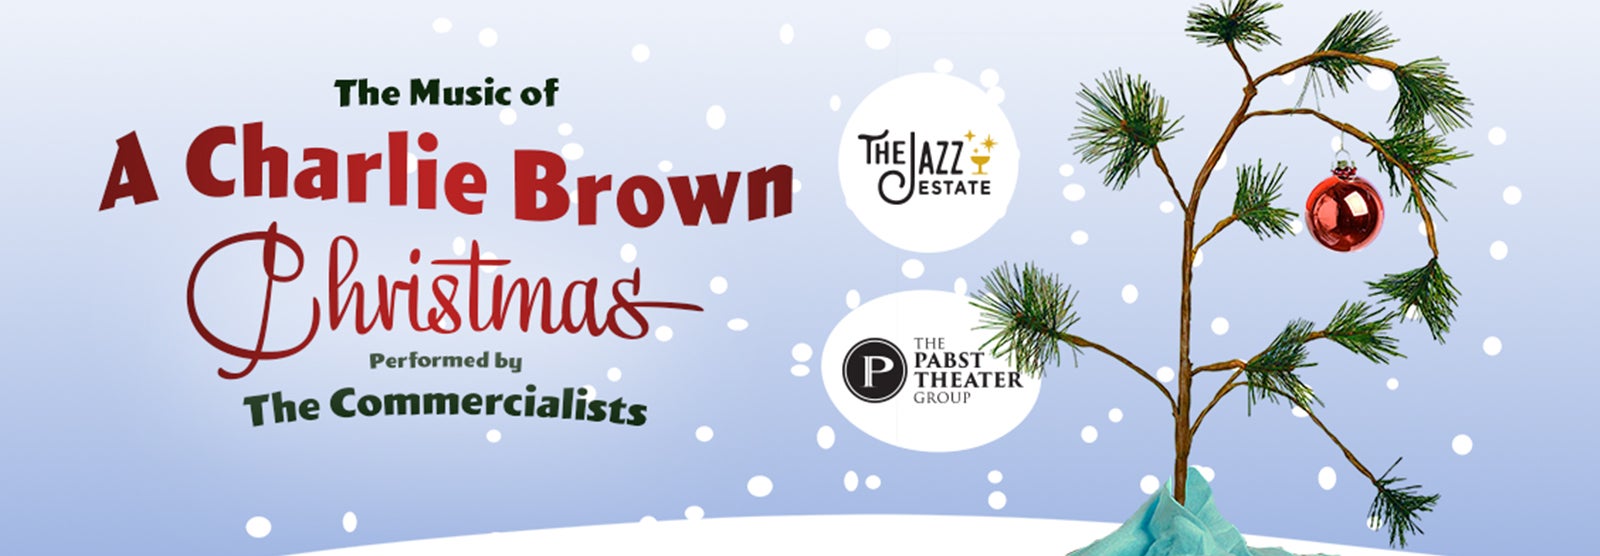 The Commercialists play the music of the Vince Guaraldi Trio’s "A Charlie Brown Christmas"